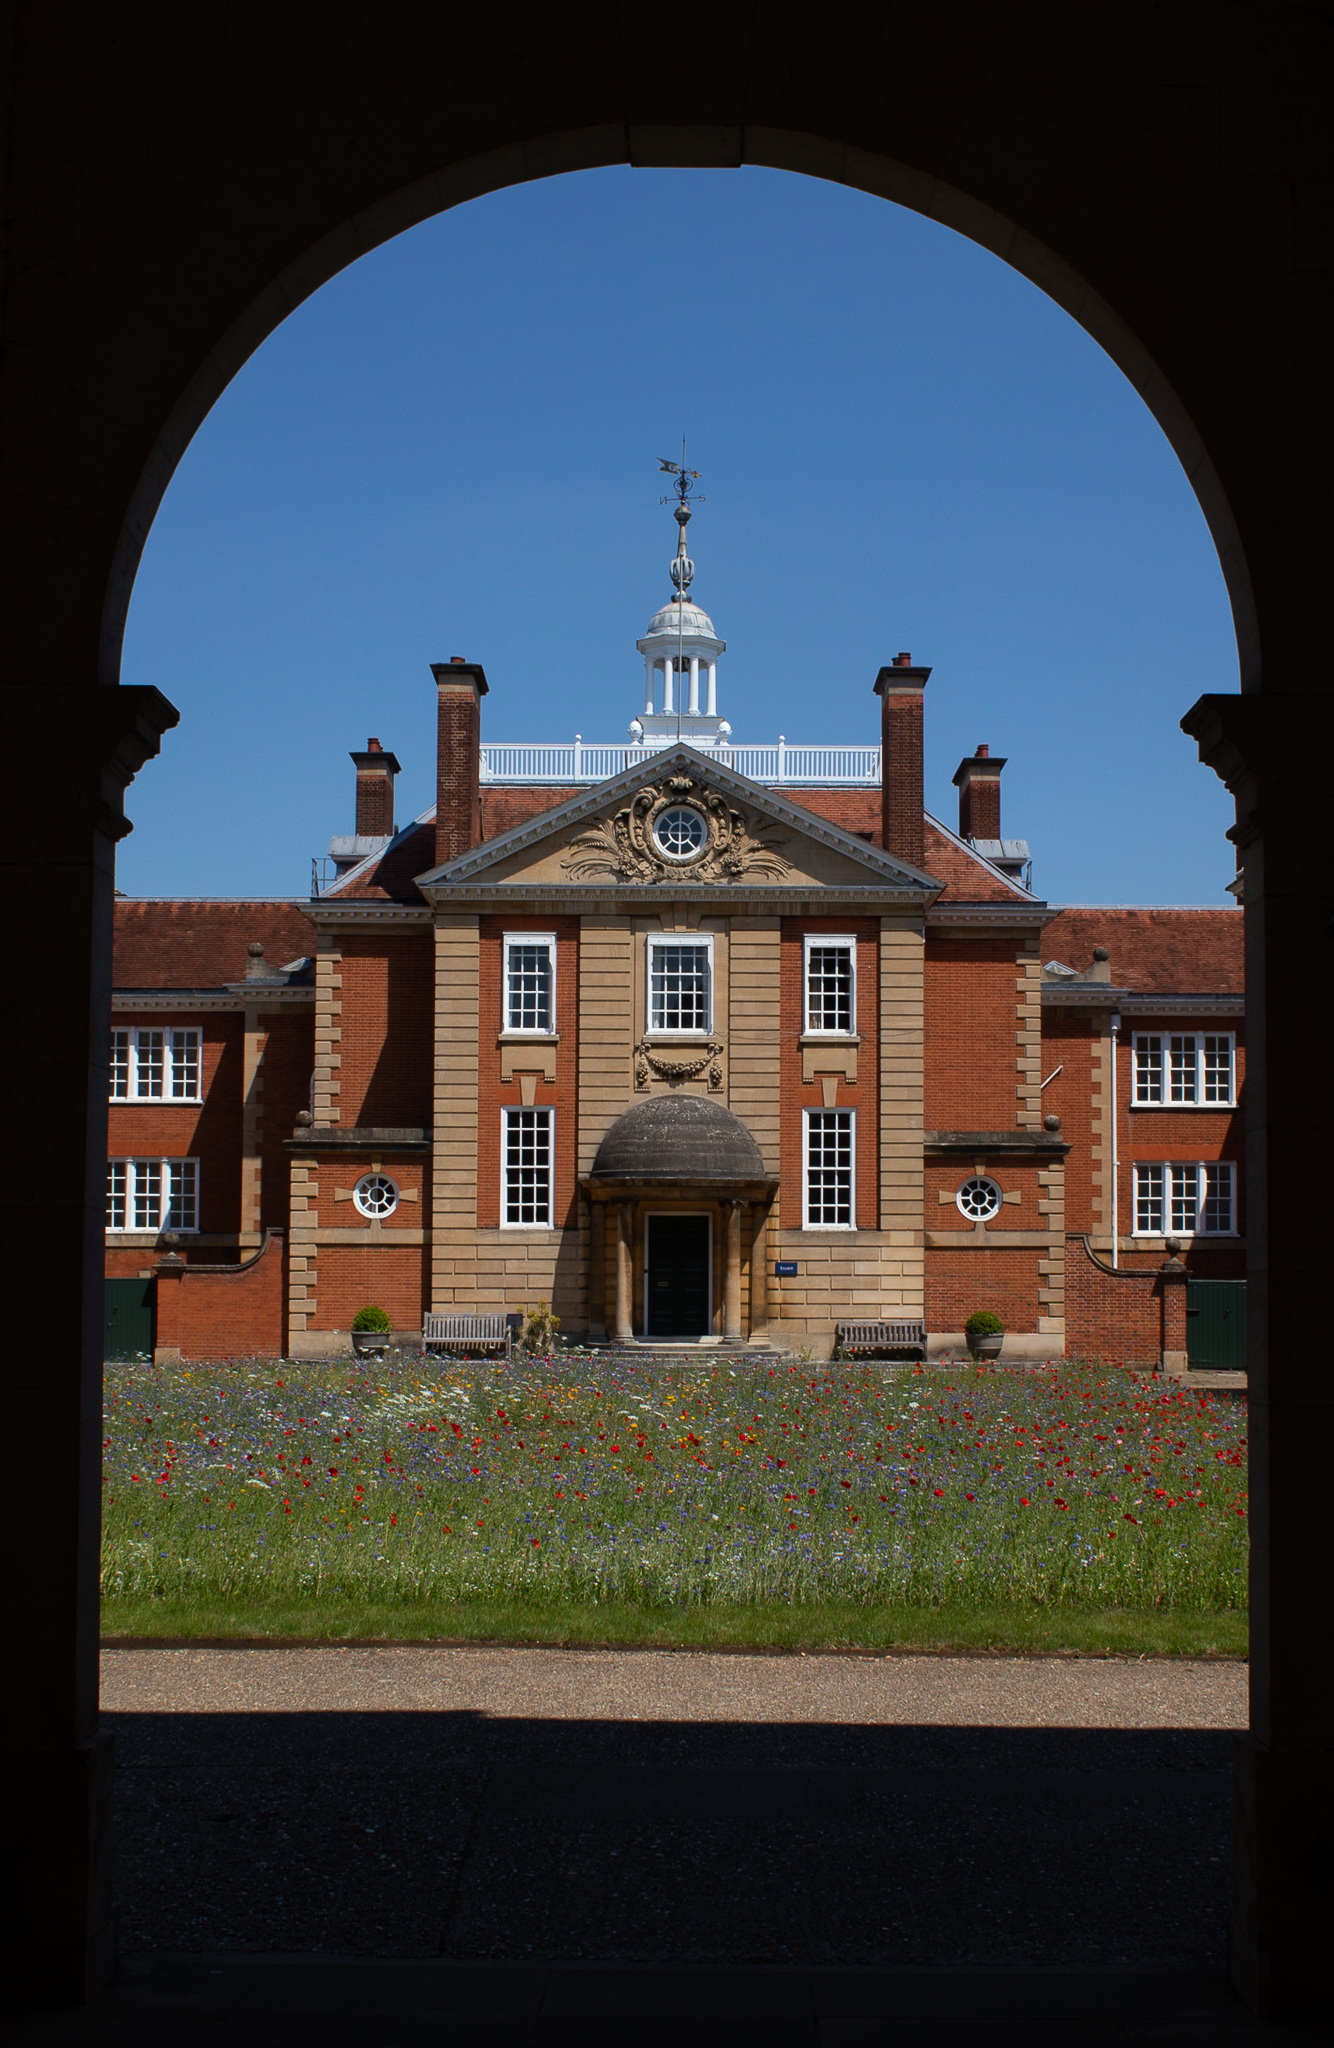 Photo by Michelle Mendieta Mean - View of Talbot Hall and flower meadow through the archway